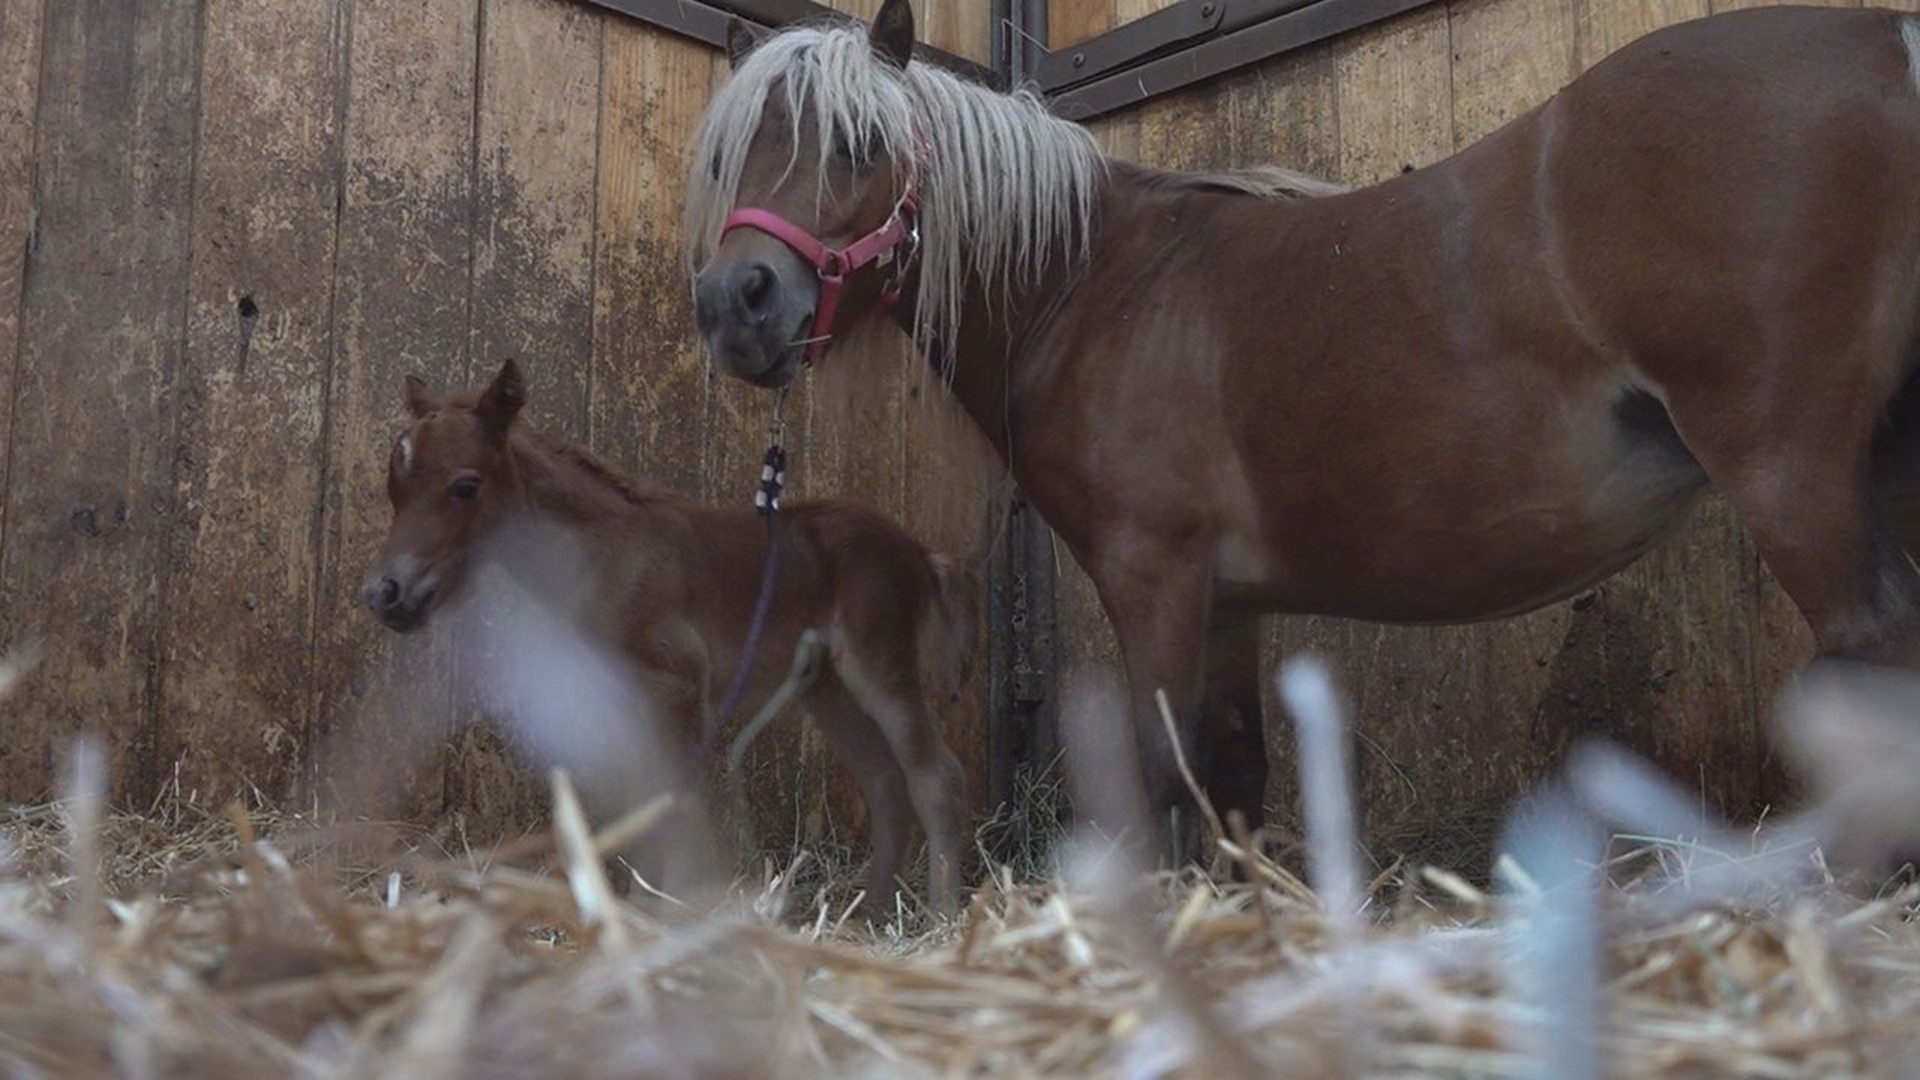 The nonprofit took in two stallions and three mares from a kill pen.